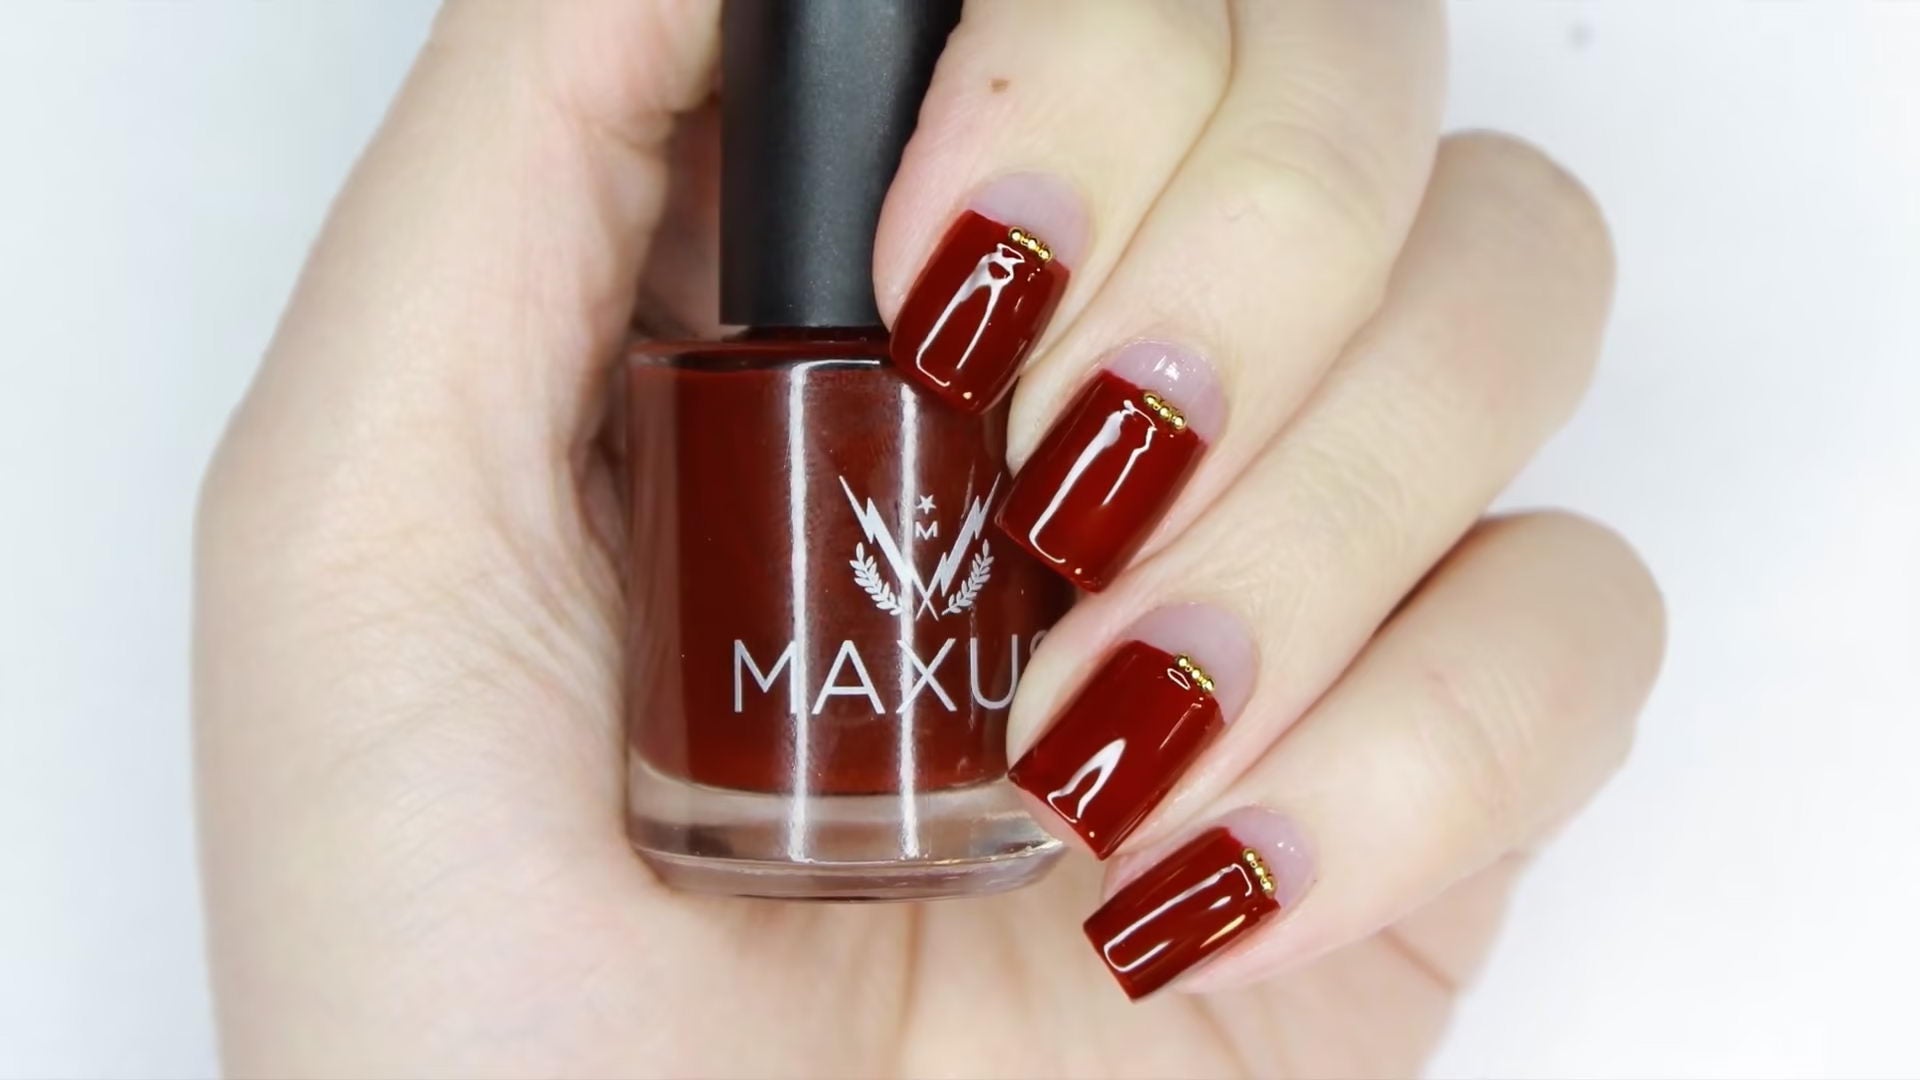 Maxus Mani using Admired from the Empower Collection.